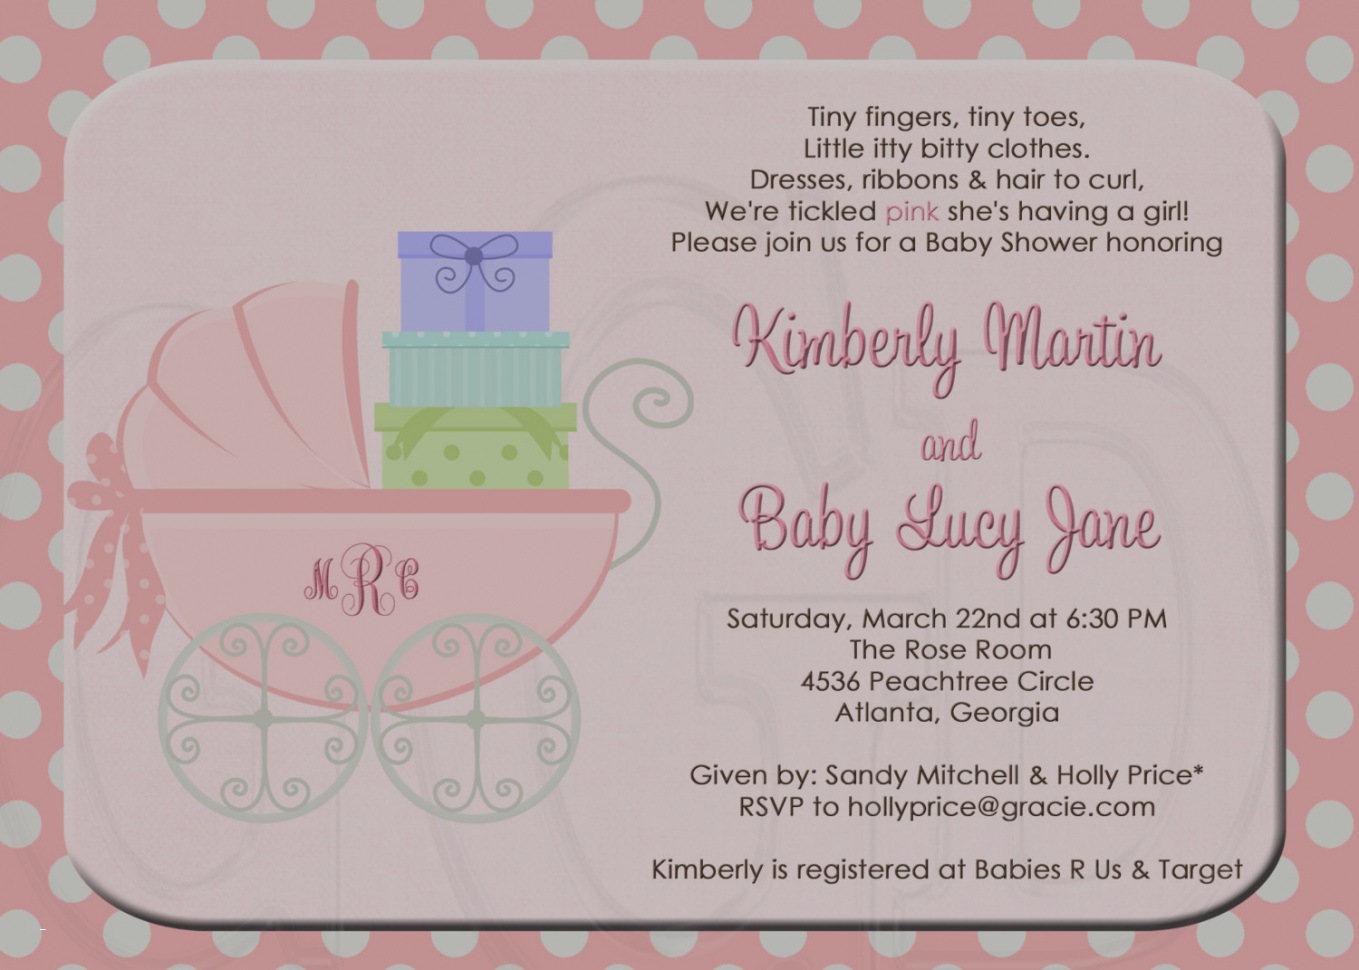 Full Size of Baby Shower:63+ Delightful Cheap Baby Shower Invitations Image Inspirations Cheap Baby Shower Invitations Design Your Own Baby Shower Invitations New Elegant Example Baby Shower Invitations Baby Shower Invitation